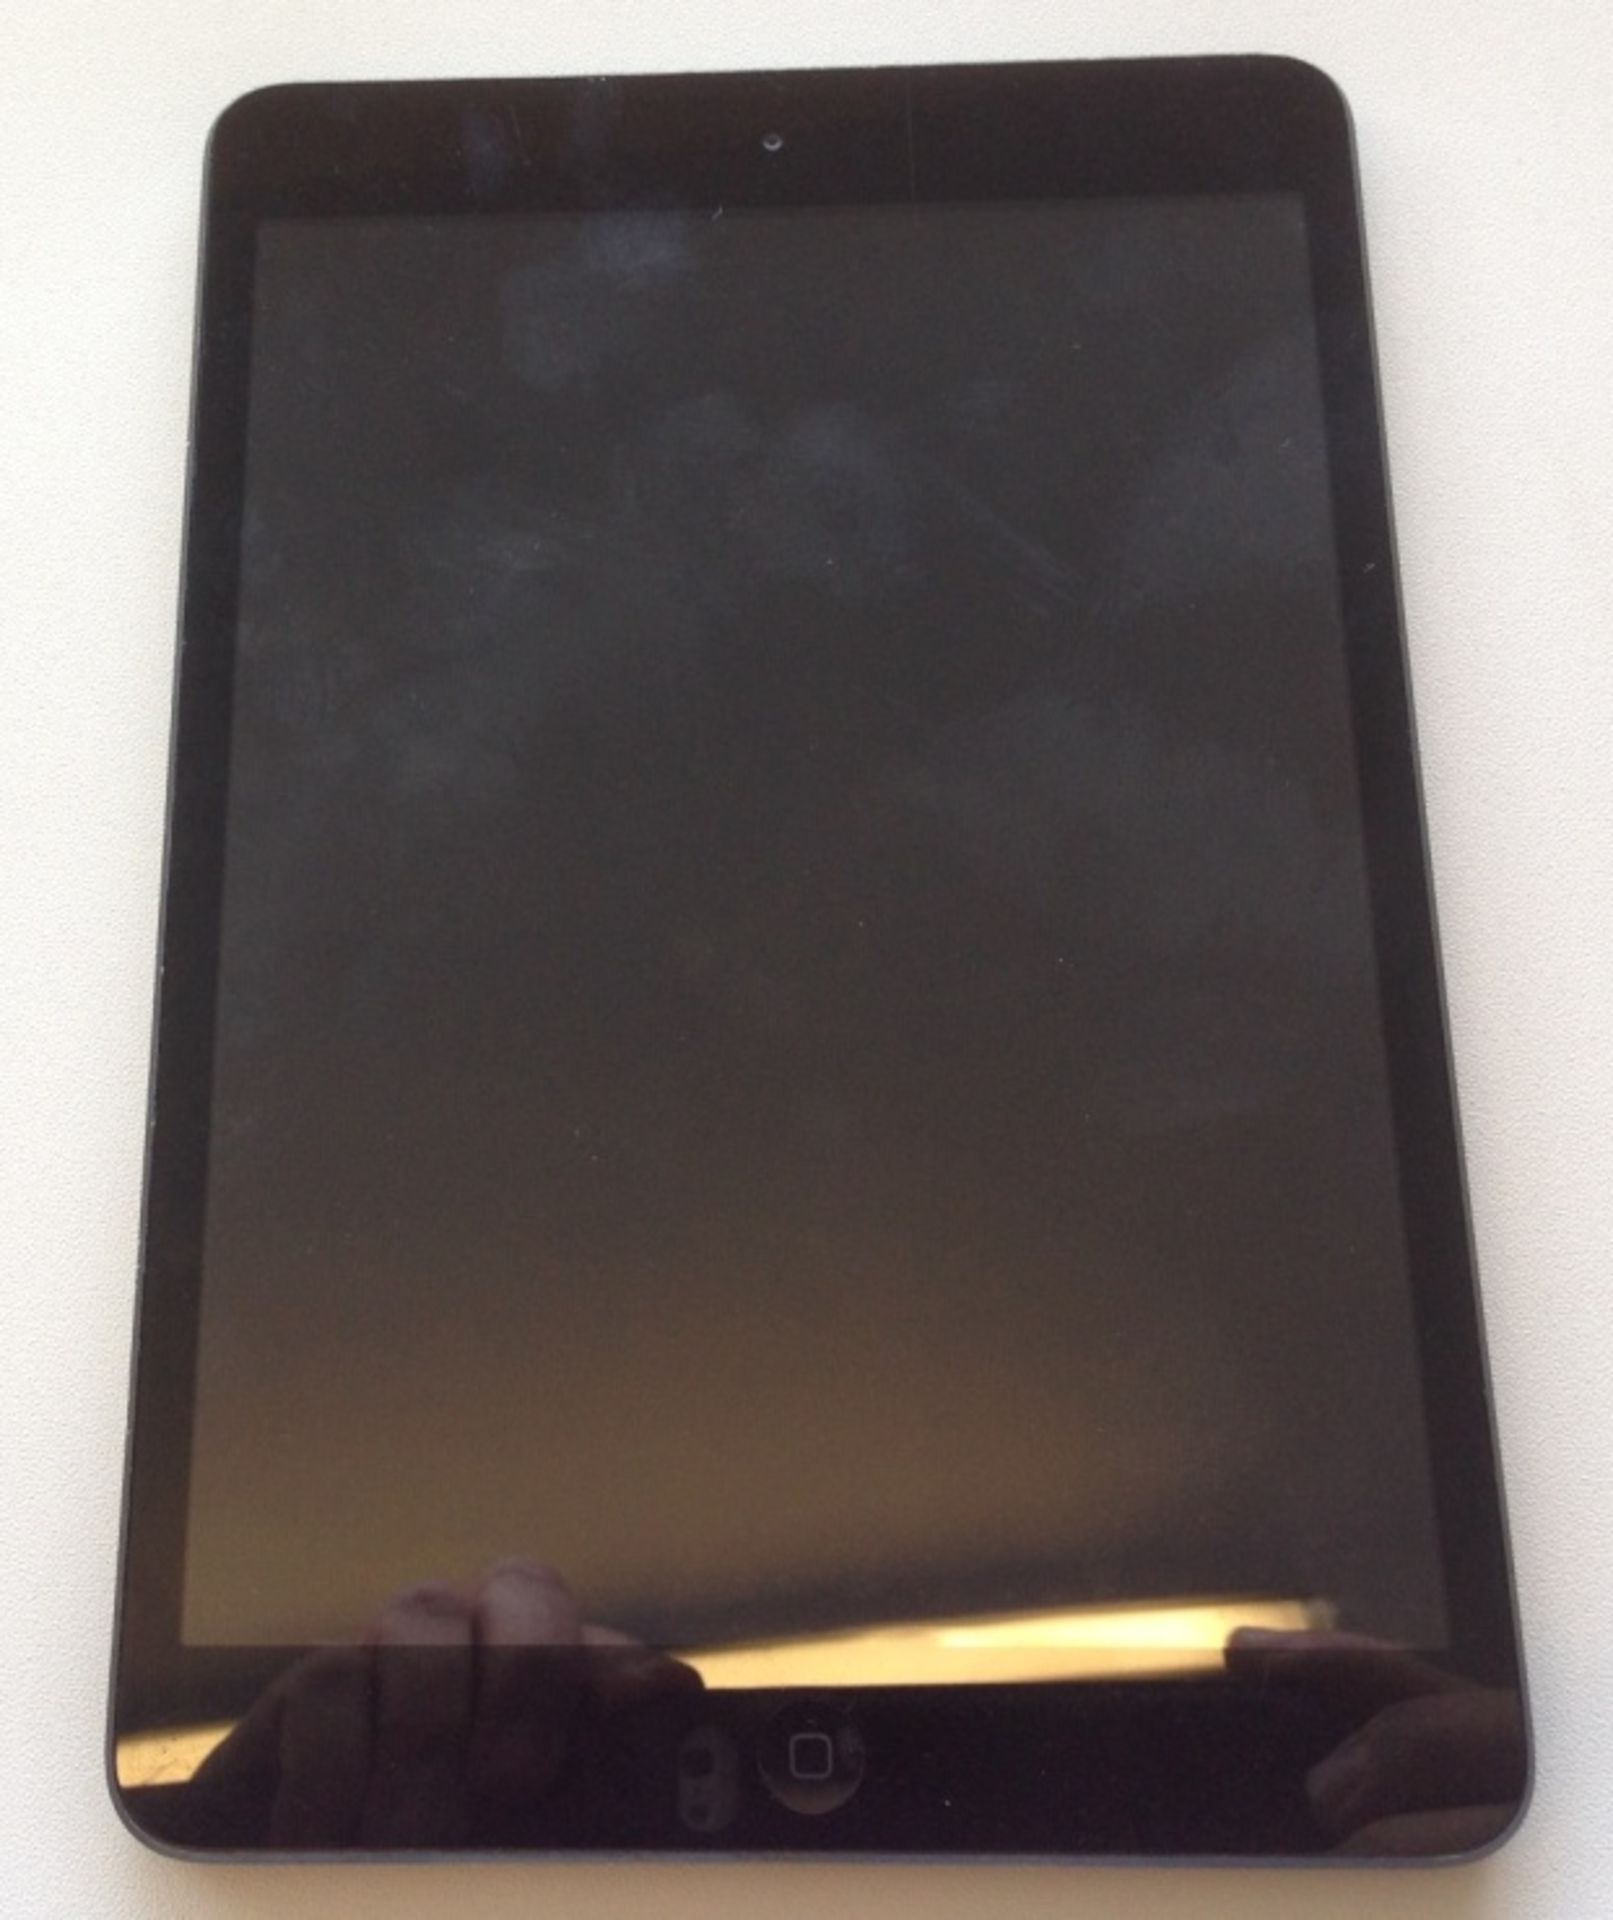 Ipad Mini 16GB Space Grey  Grade B+ fully tested may have light scratches original Box + Cable